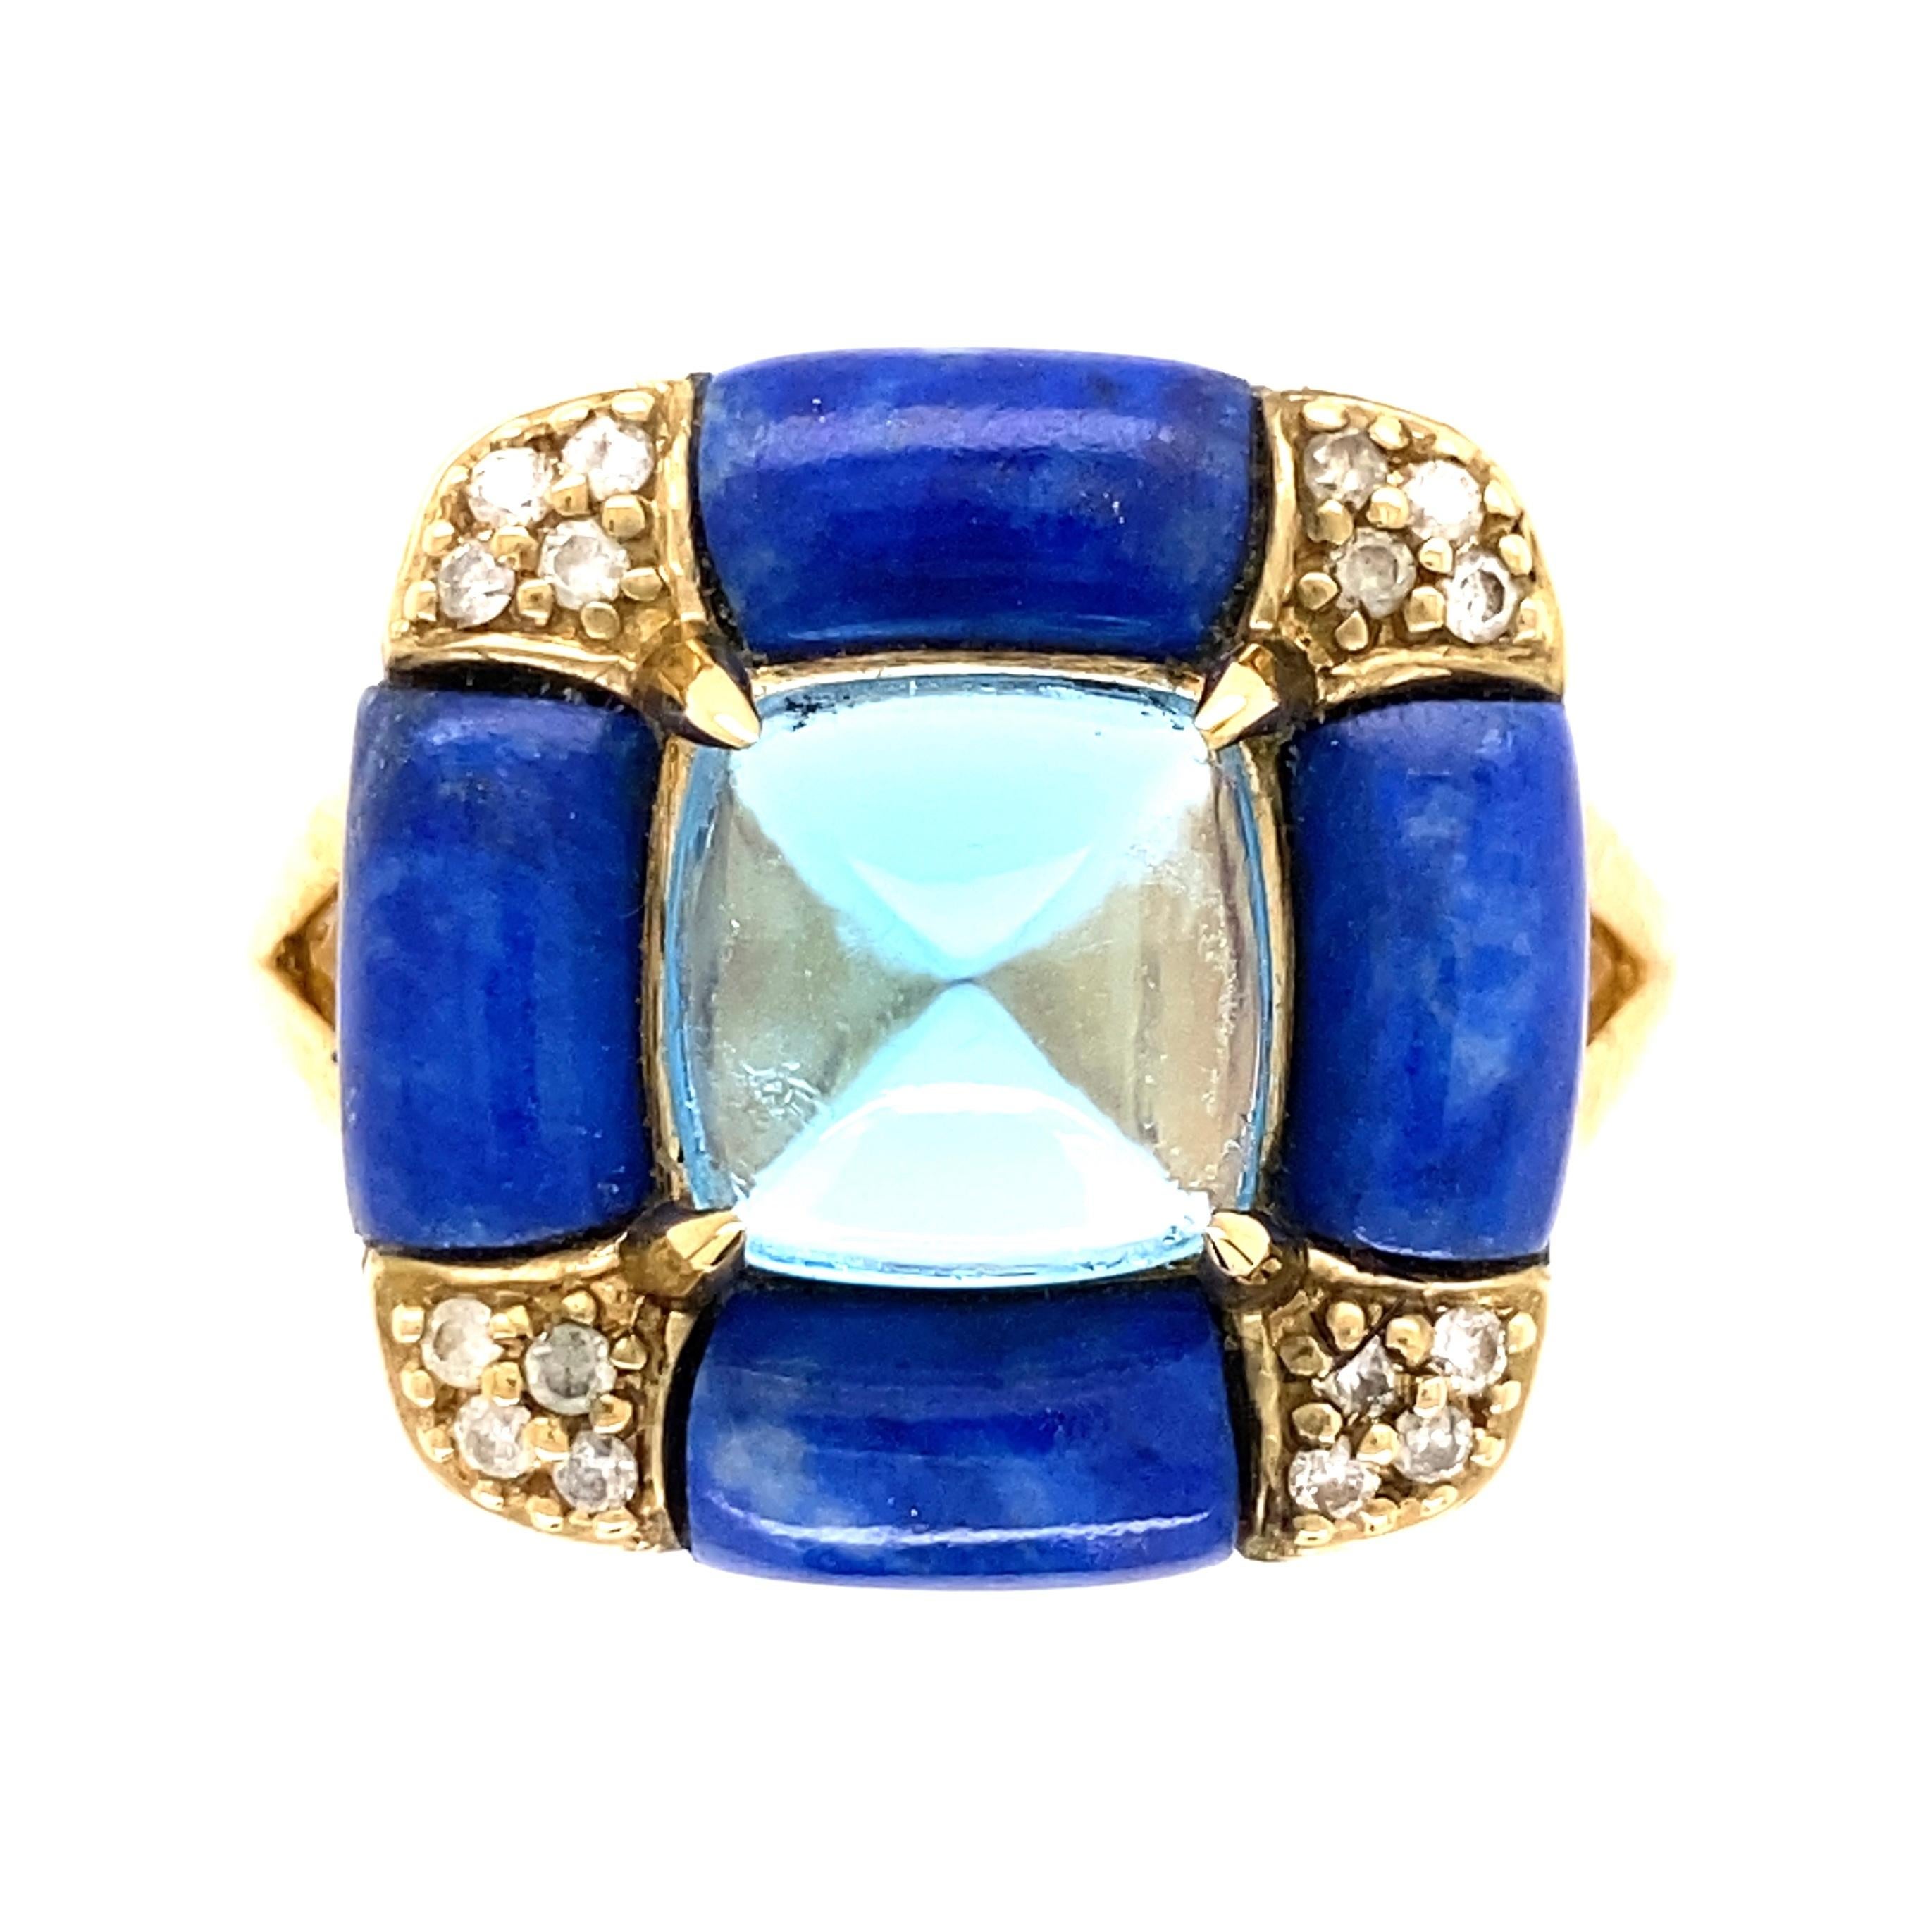 5.38 Carat Sugarloaf Blue Topaz Lapis and Diamond Ring Estate Fine Jewelry In Excellent Condition For Sale In Montreal, QC